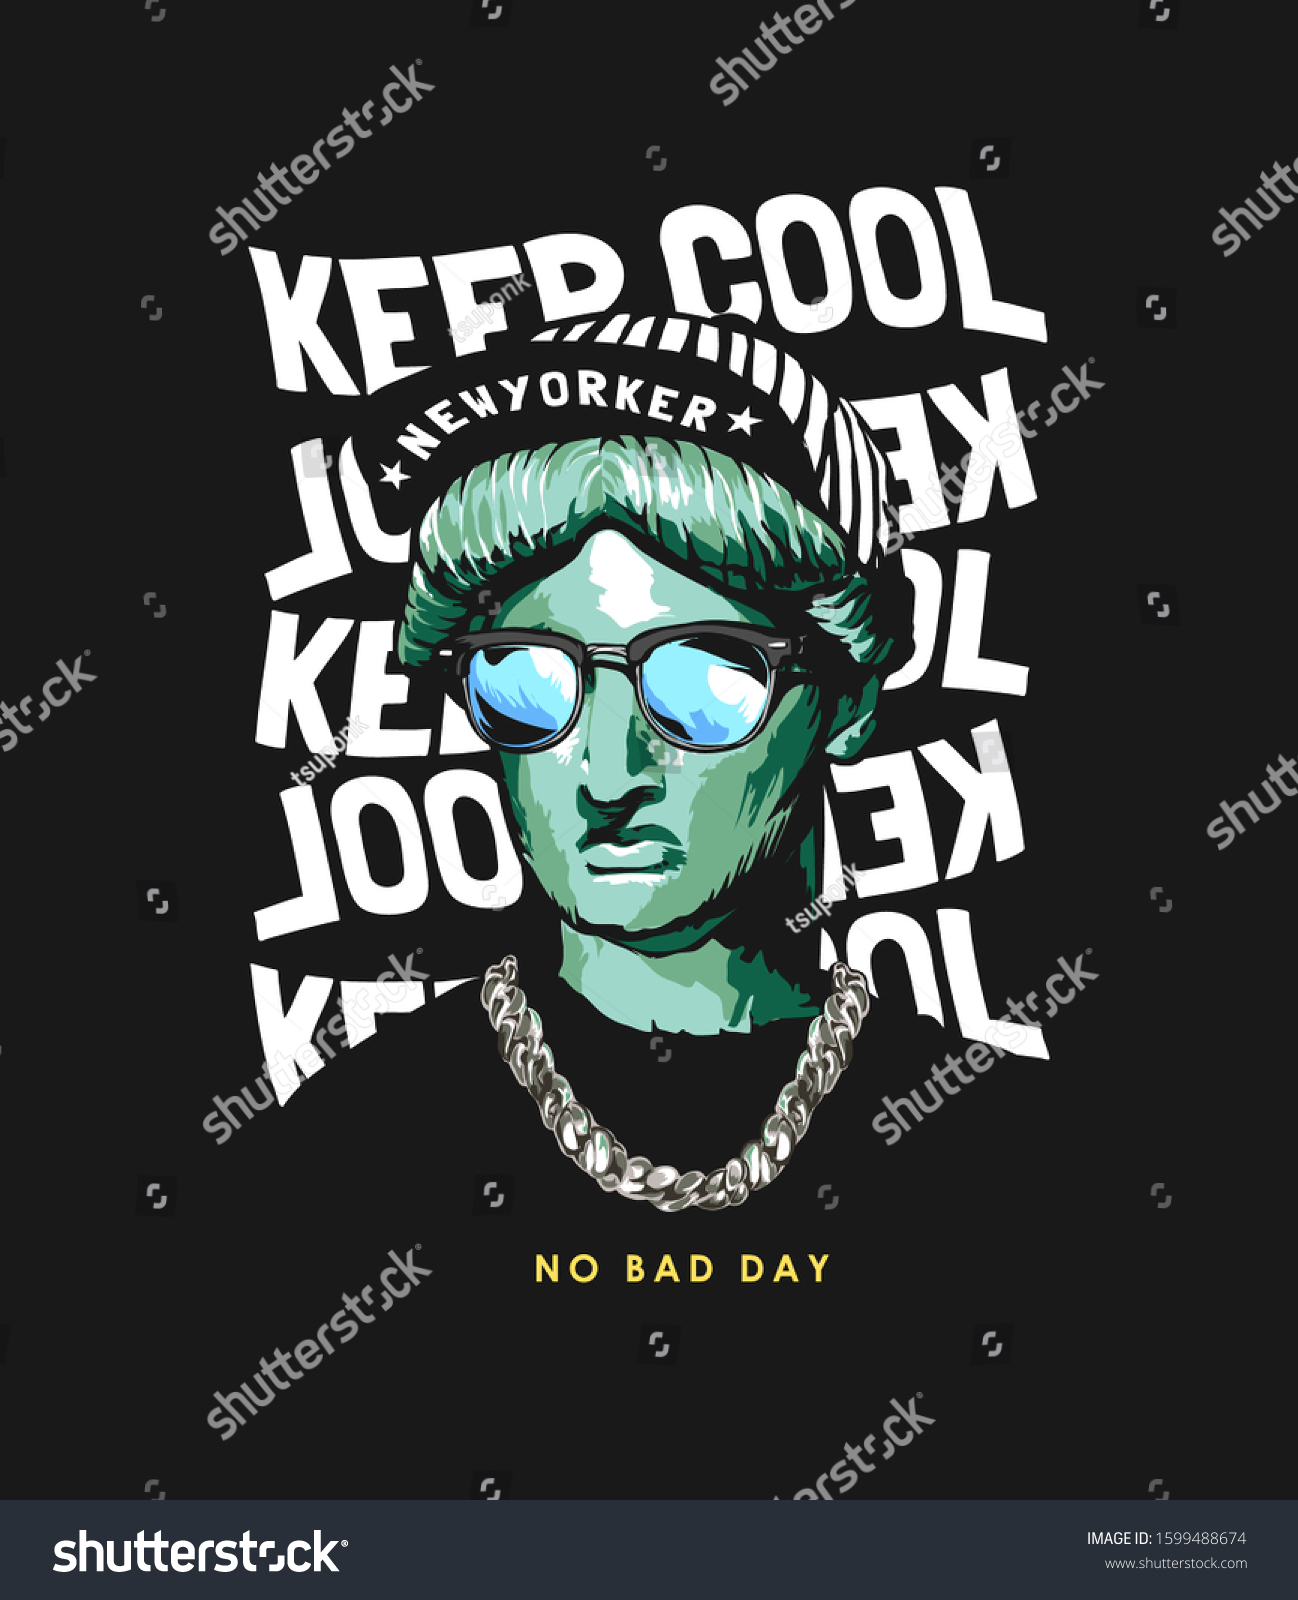 keep cool slogan with liberty statue in street fashion style illustration on black background #1599488674